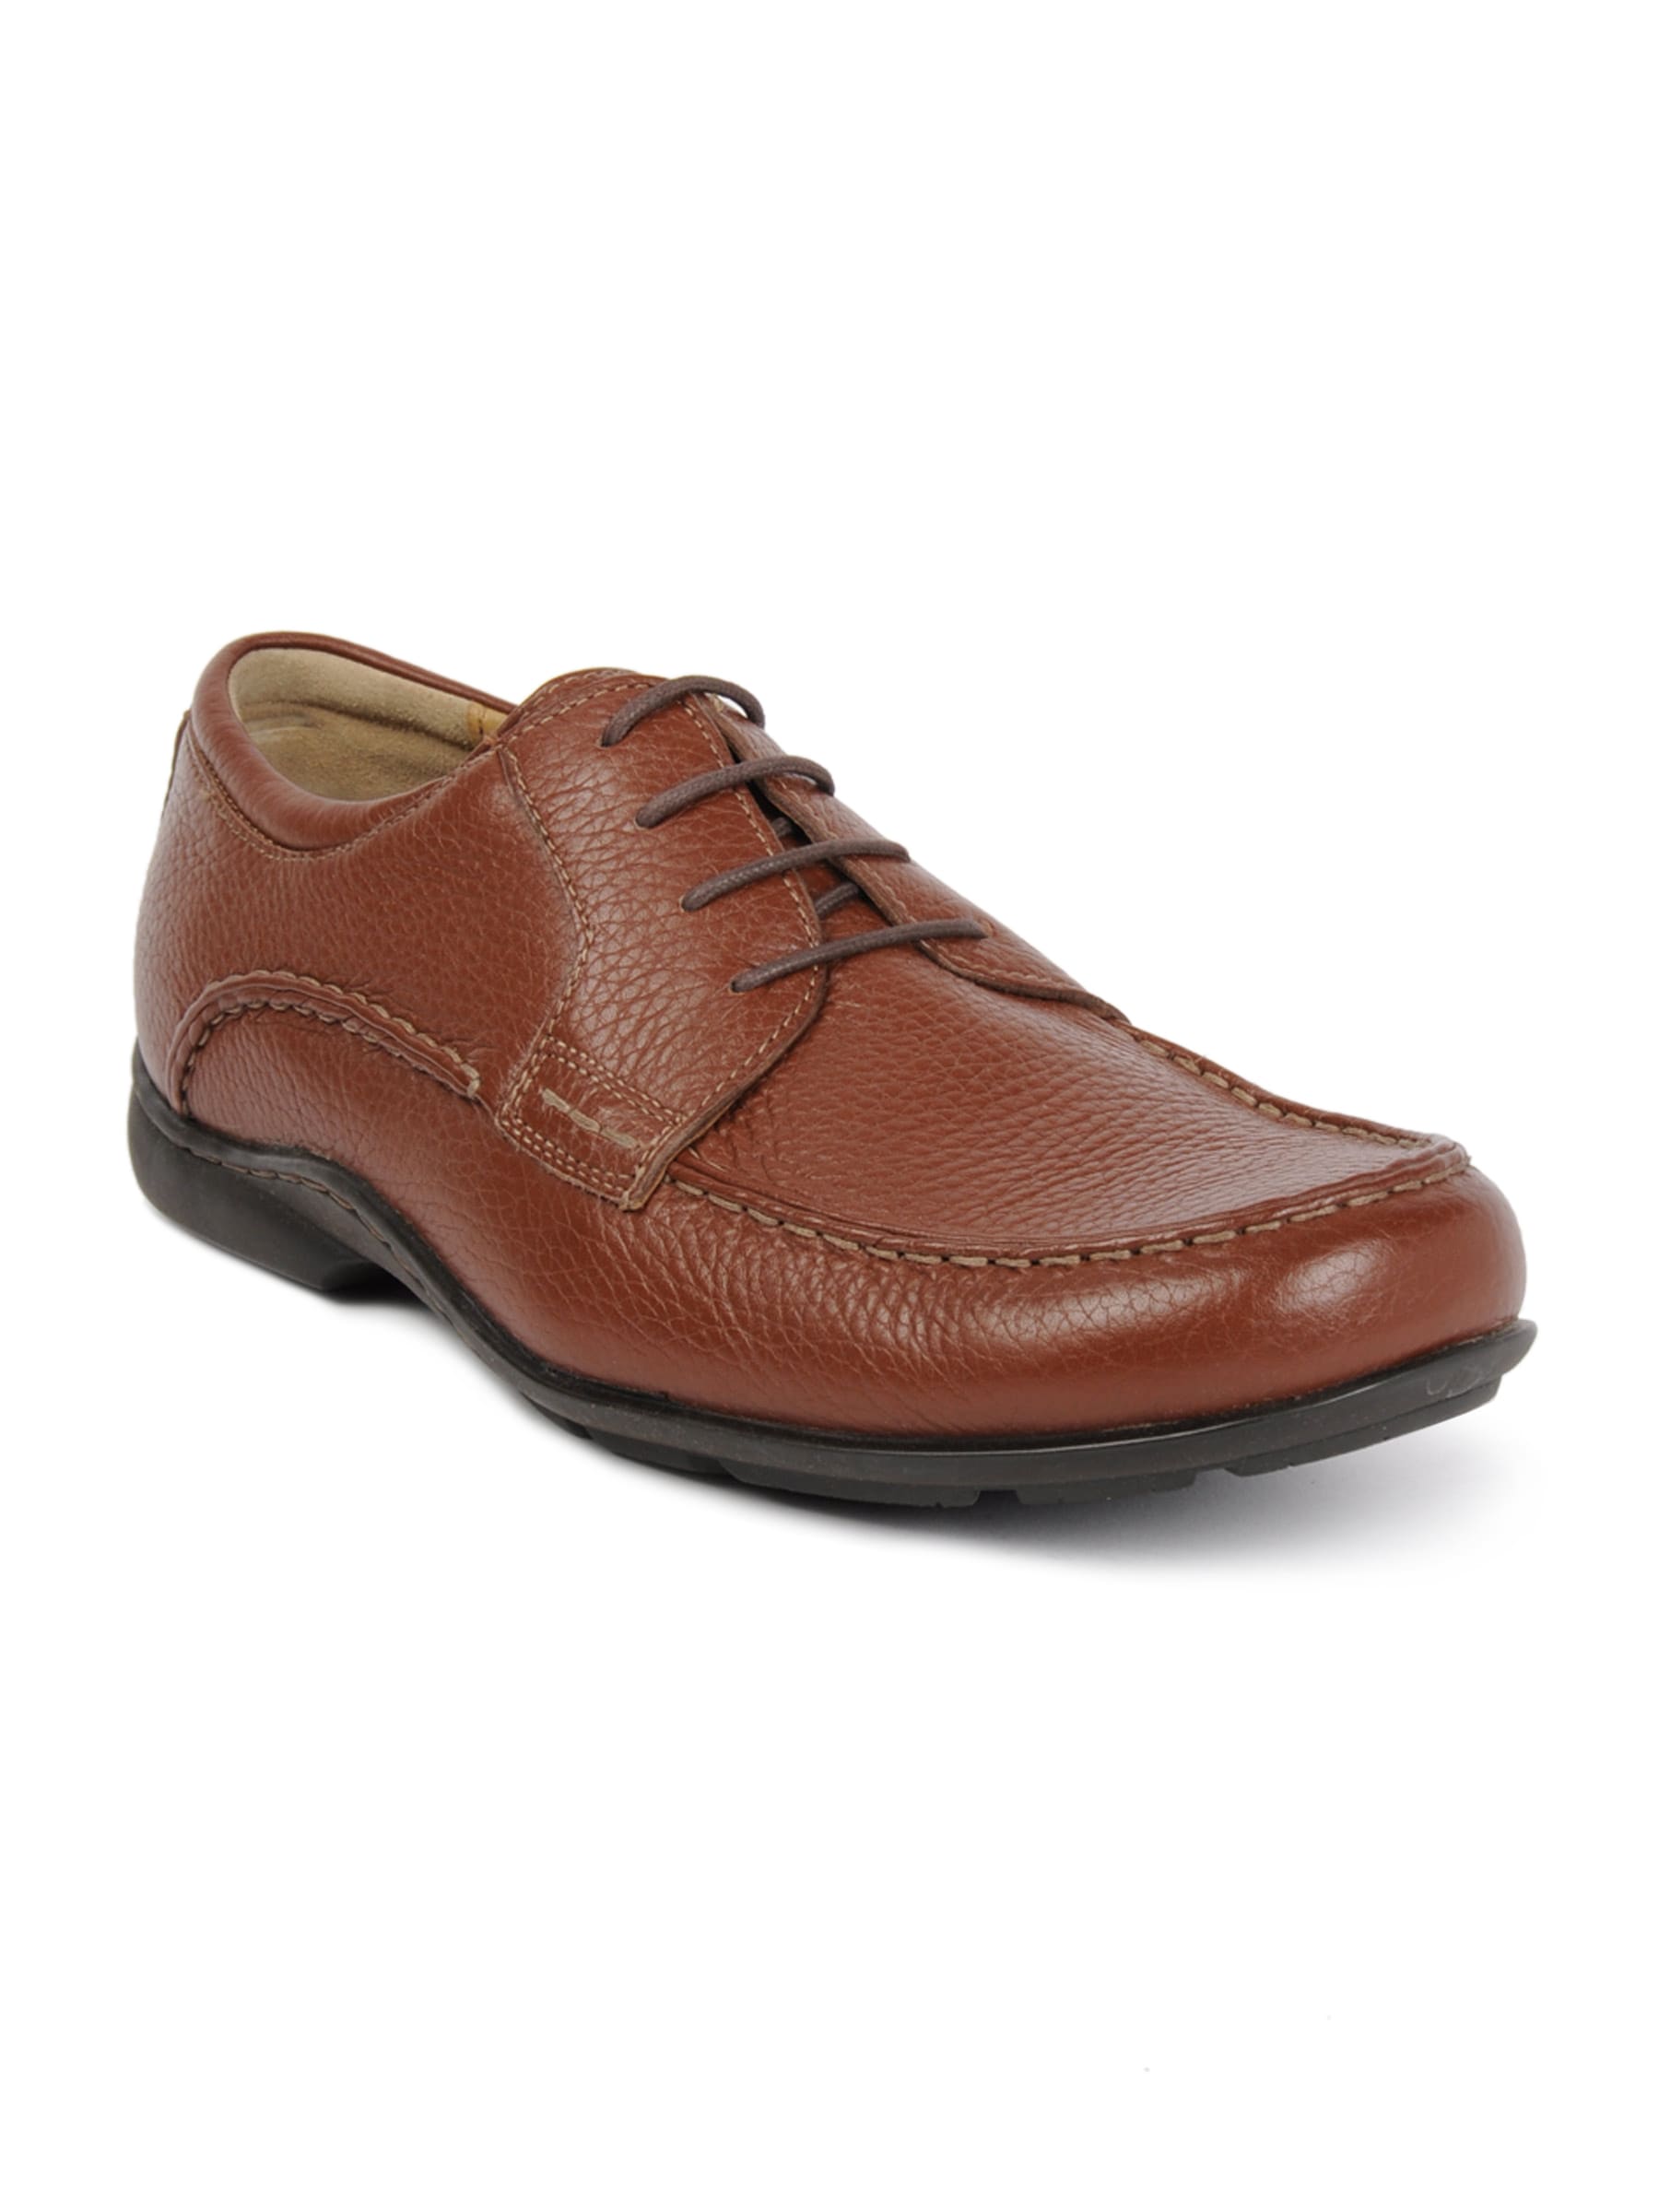 Hush Puppies Men Chevelle Brown Formal Shoes